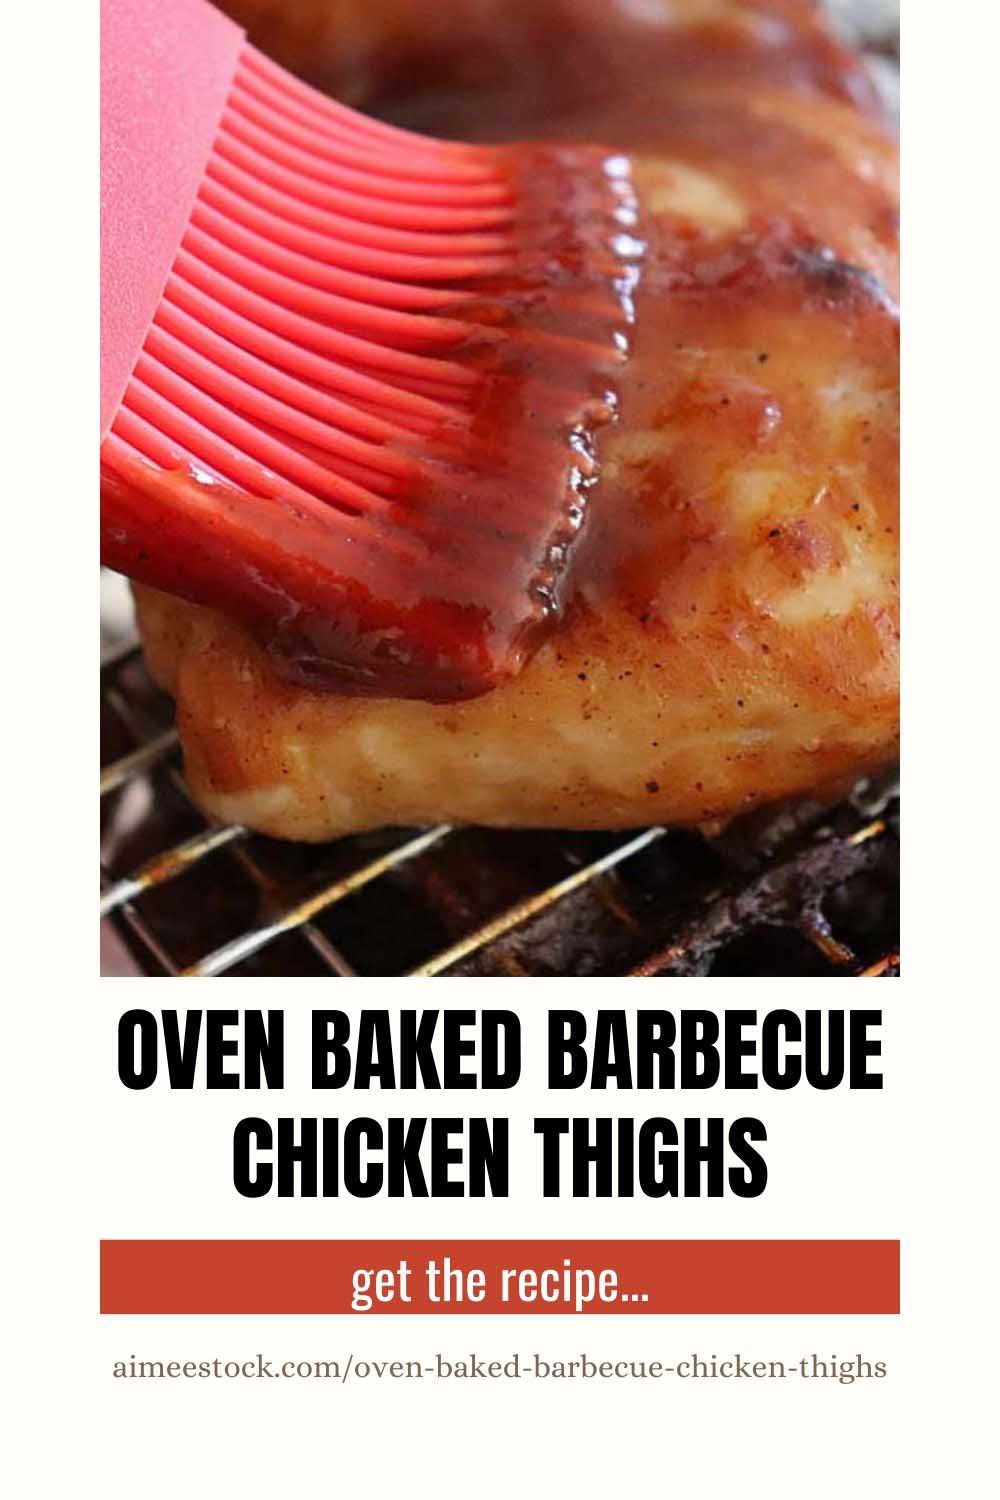 Pin for oven-baked-barbecue-chicken-thighs